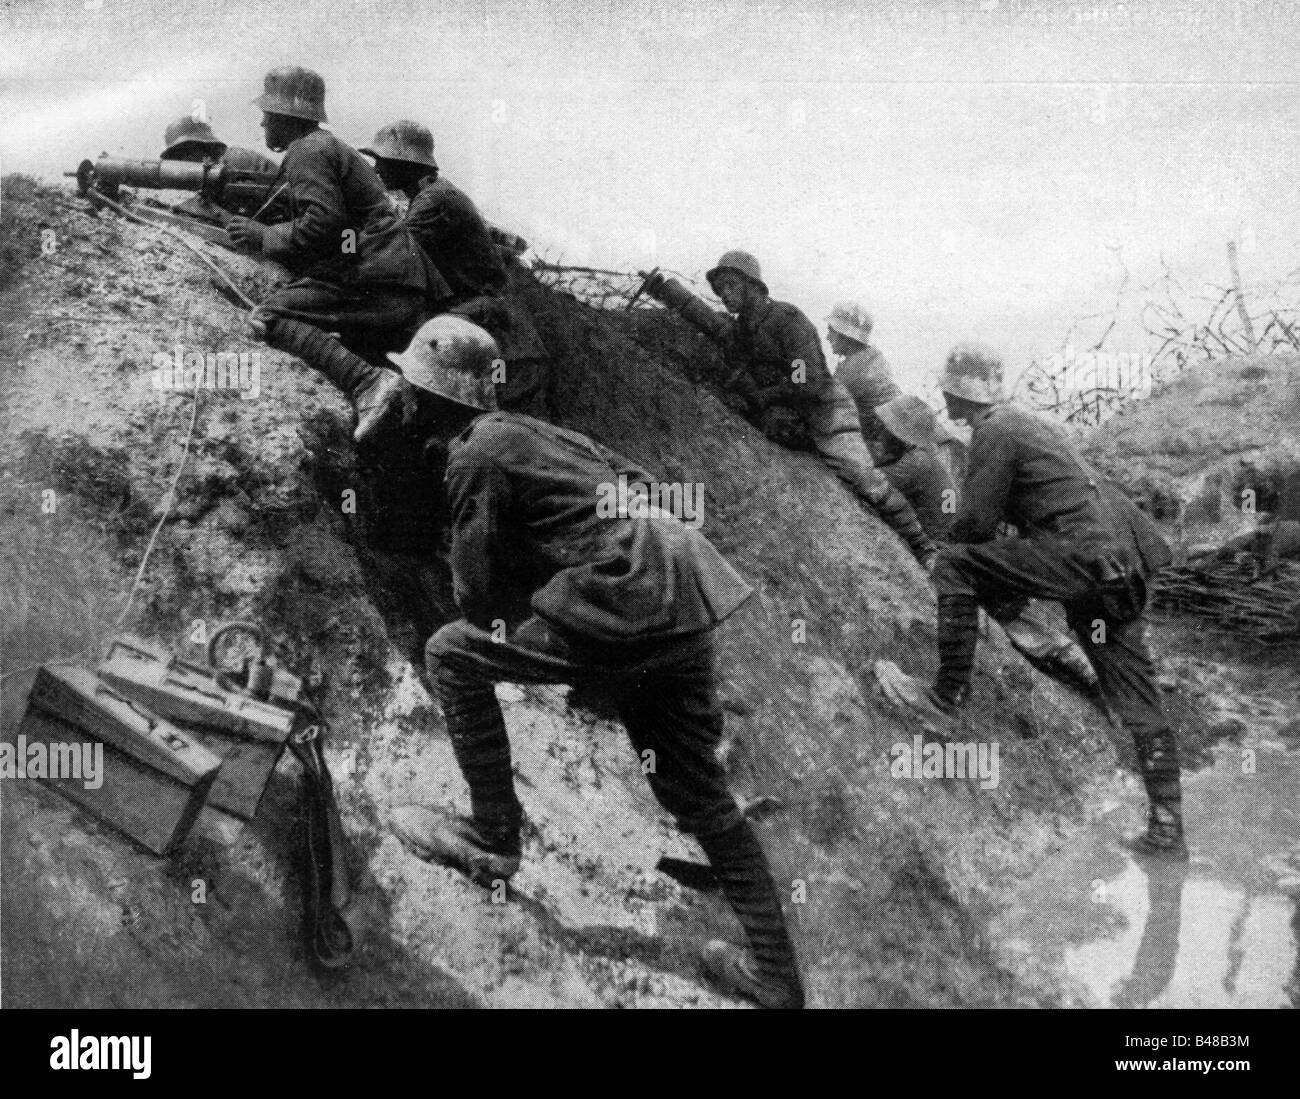 events, First World War / WWI, Western Front, defensive position of the Bavarian machine gun detachment 207, Champagne, France, July 1917, trench, trenches, warfare, MG, machinegun, Bavaria, German soldiers, historic, historical, 20th century, steel helmet, people, 1910s, Stock Photo